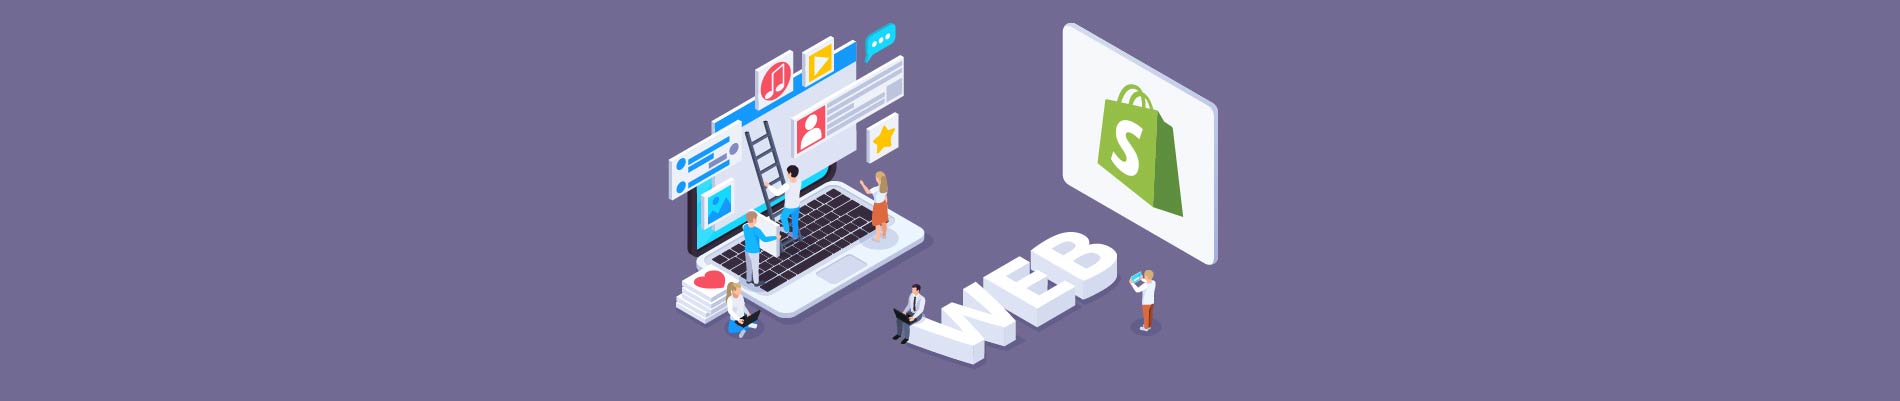 the best shopify free themes in 2021